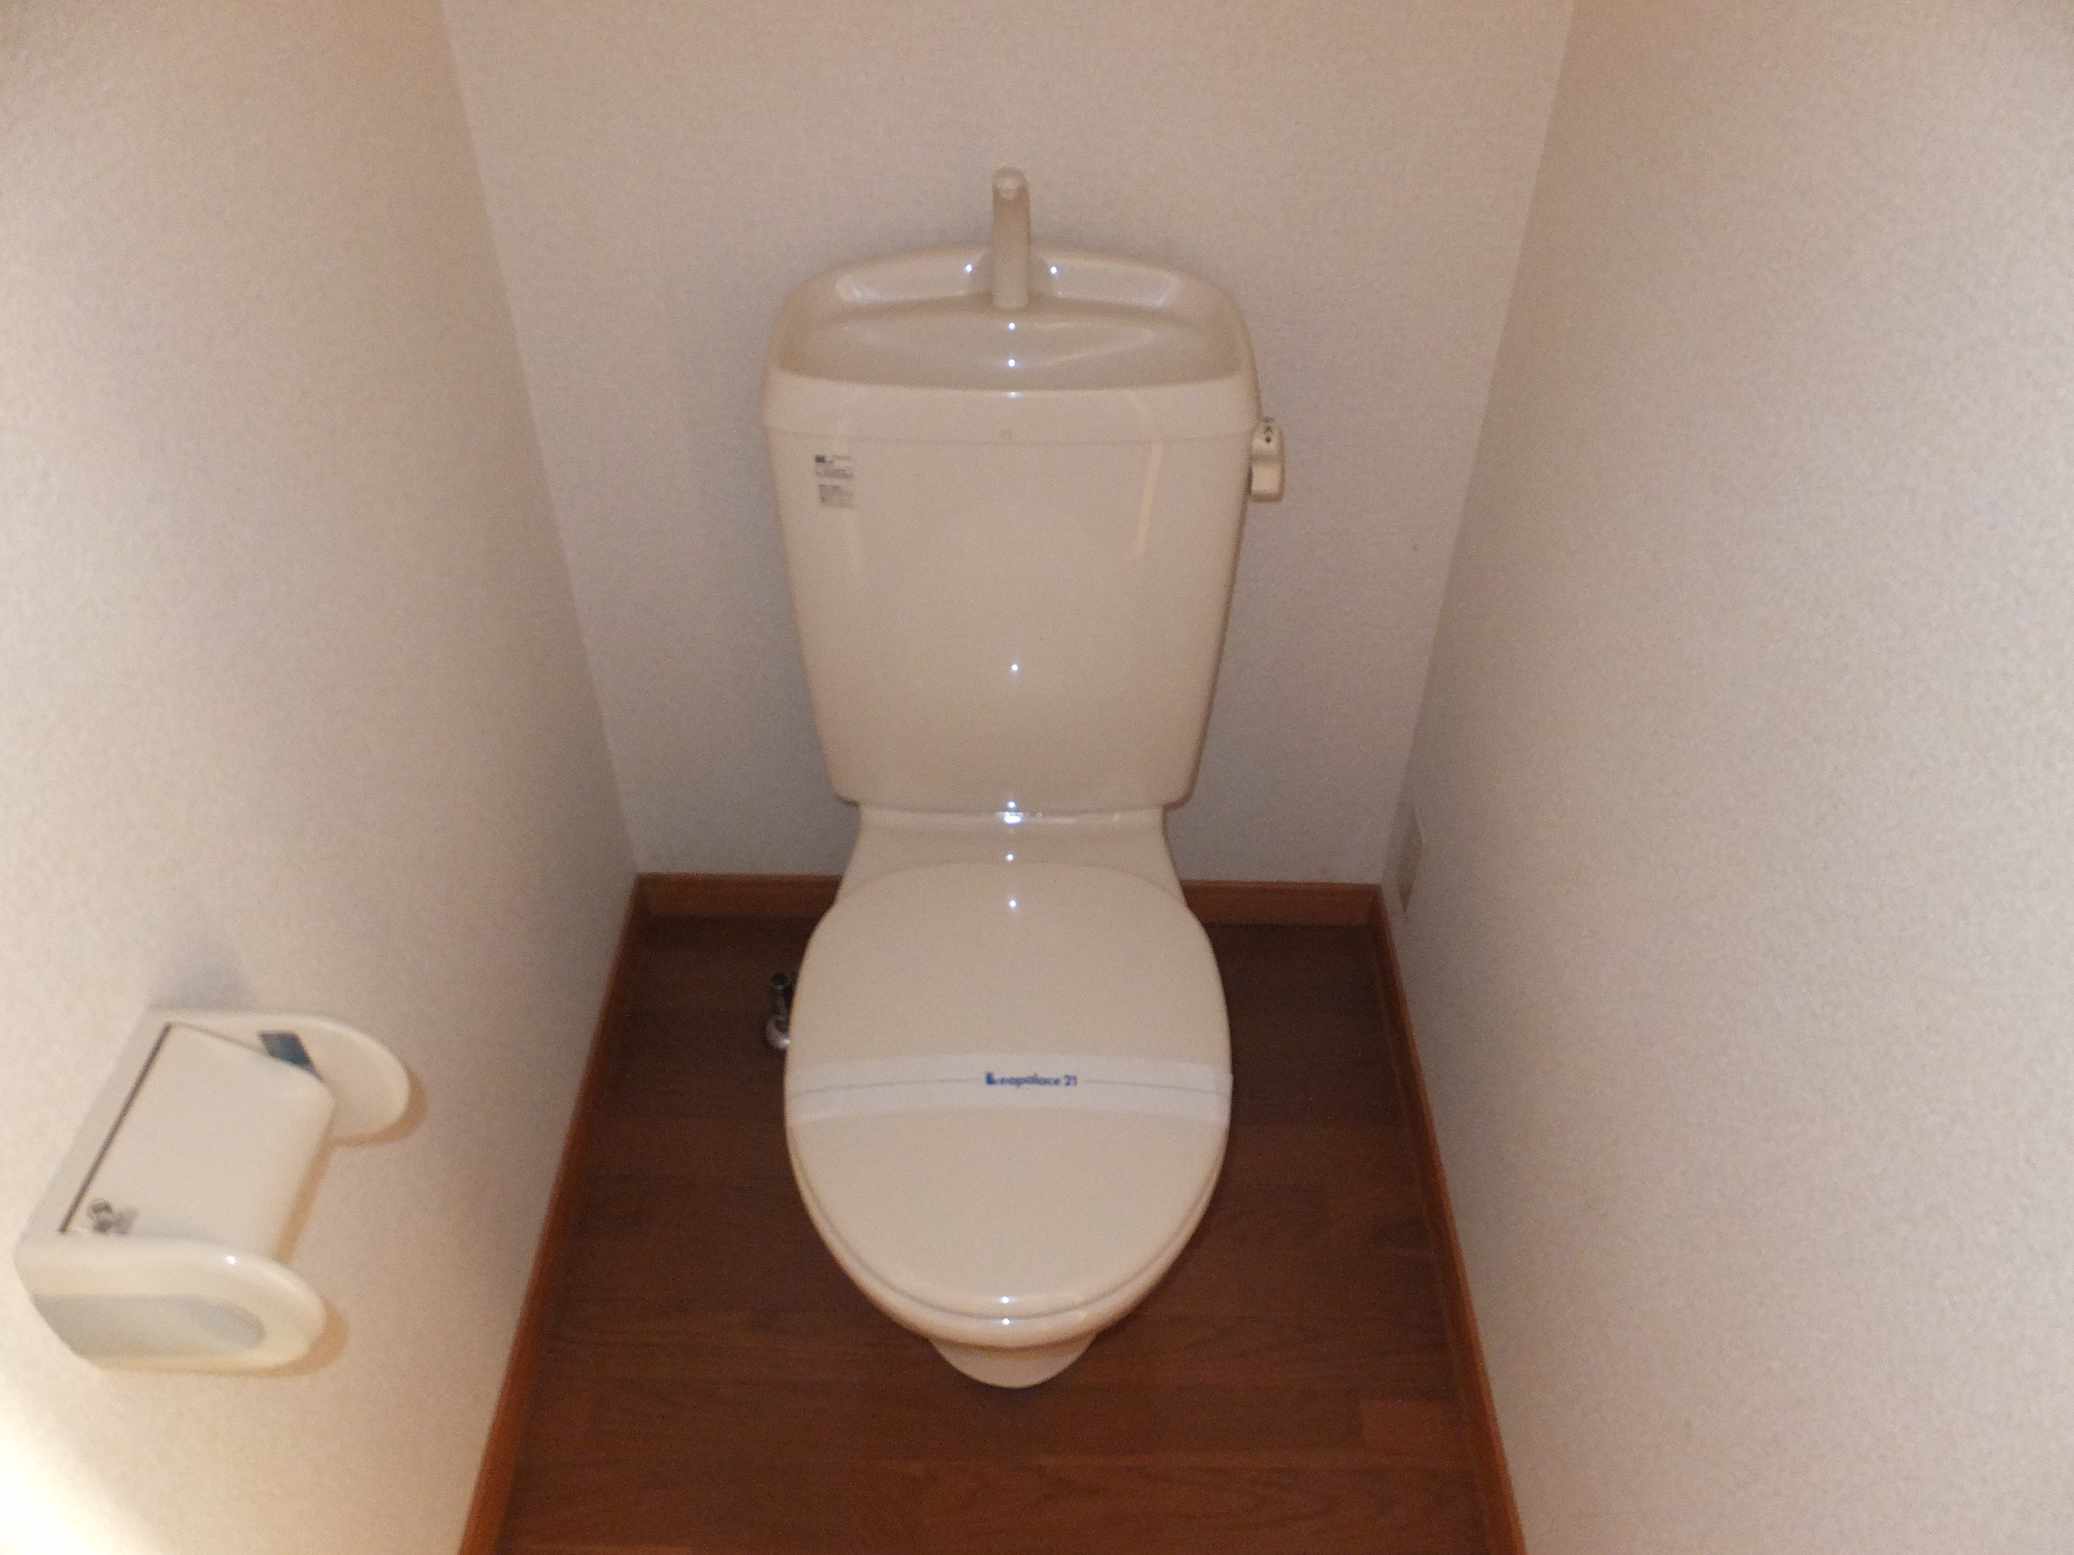 Toilet. It will be photos of the same type Property